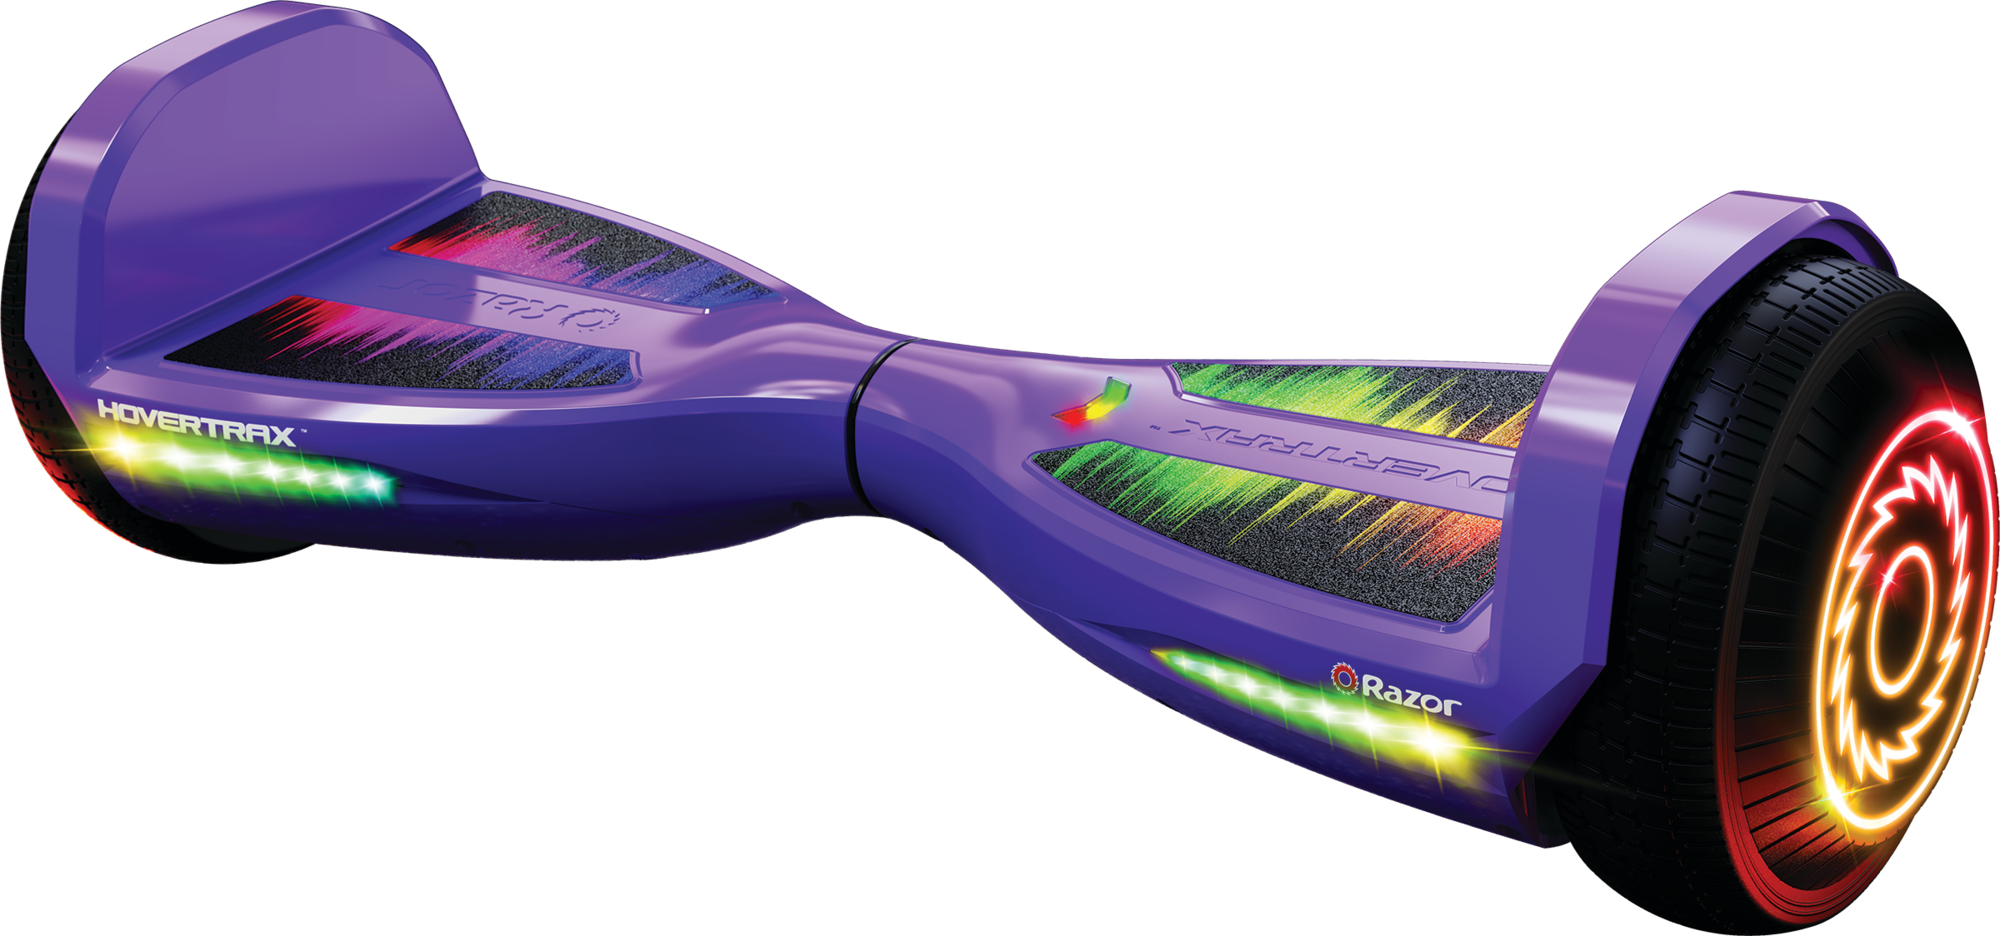 Razor Black Label Hovertrax - Purple, UL2272 Hoverboard for Child Ages 8+, Customizable Color Decals - image 1 of 12